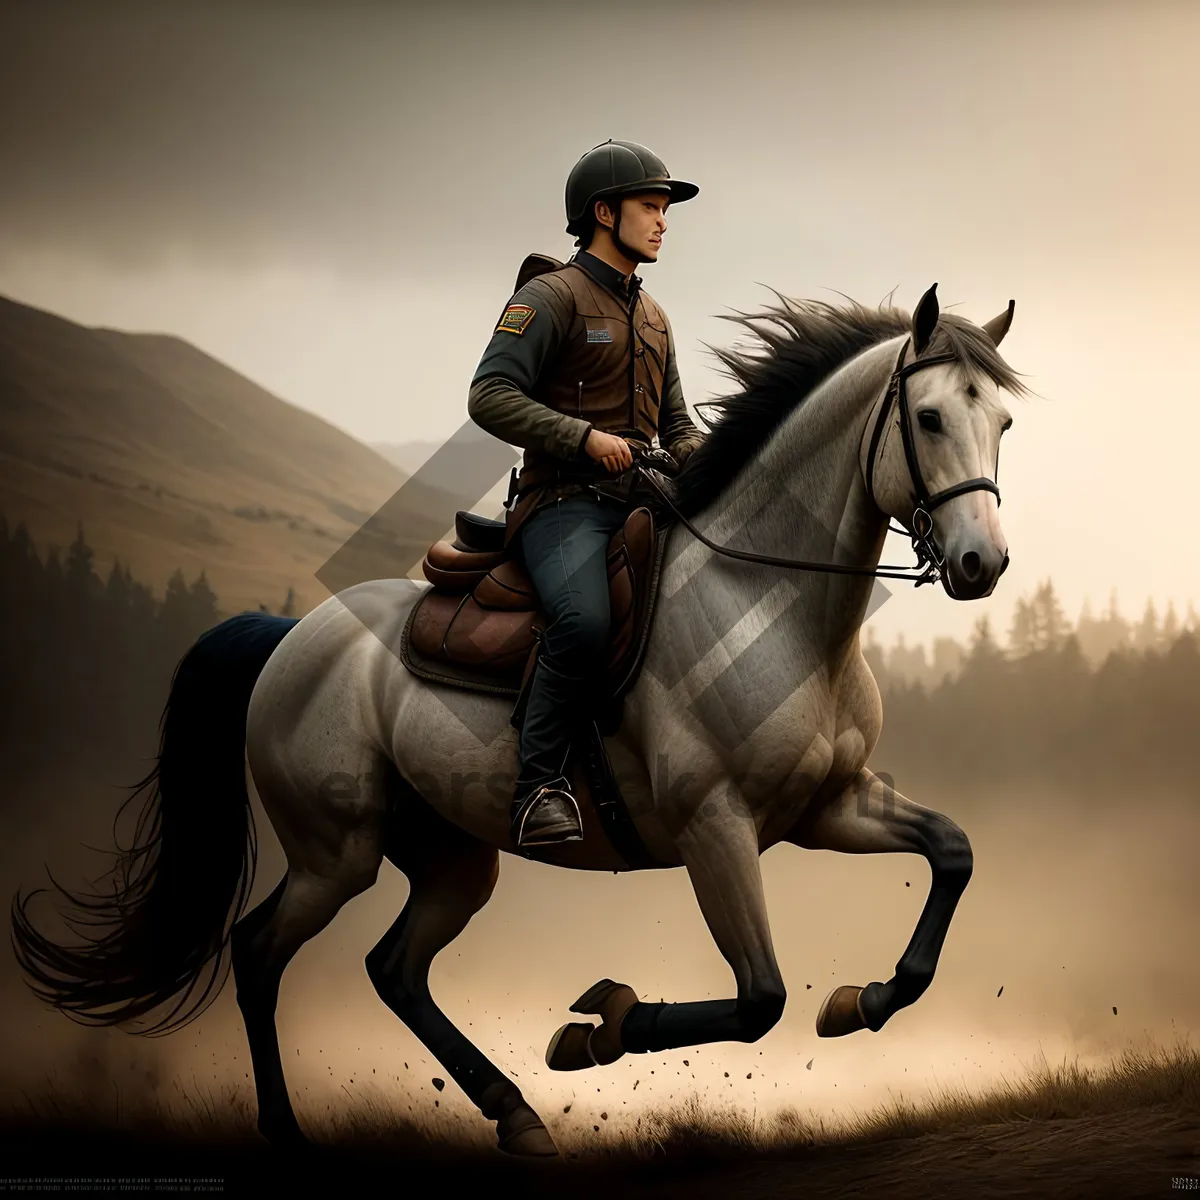 Picture of Horse Rider in Cowboy Gear with Bridle